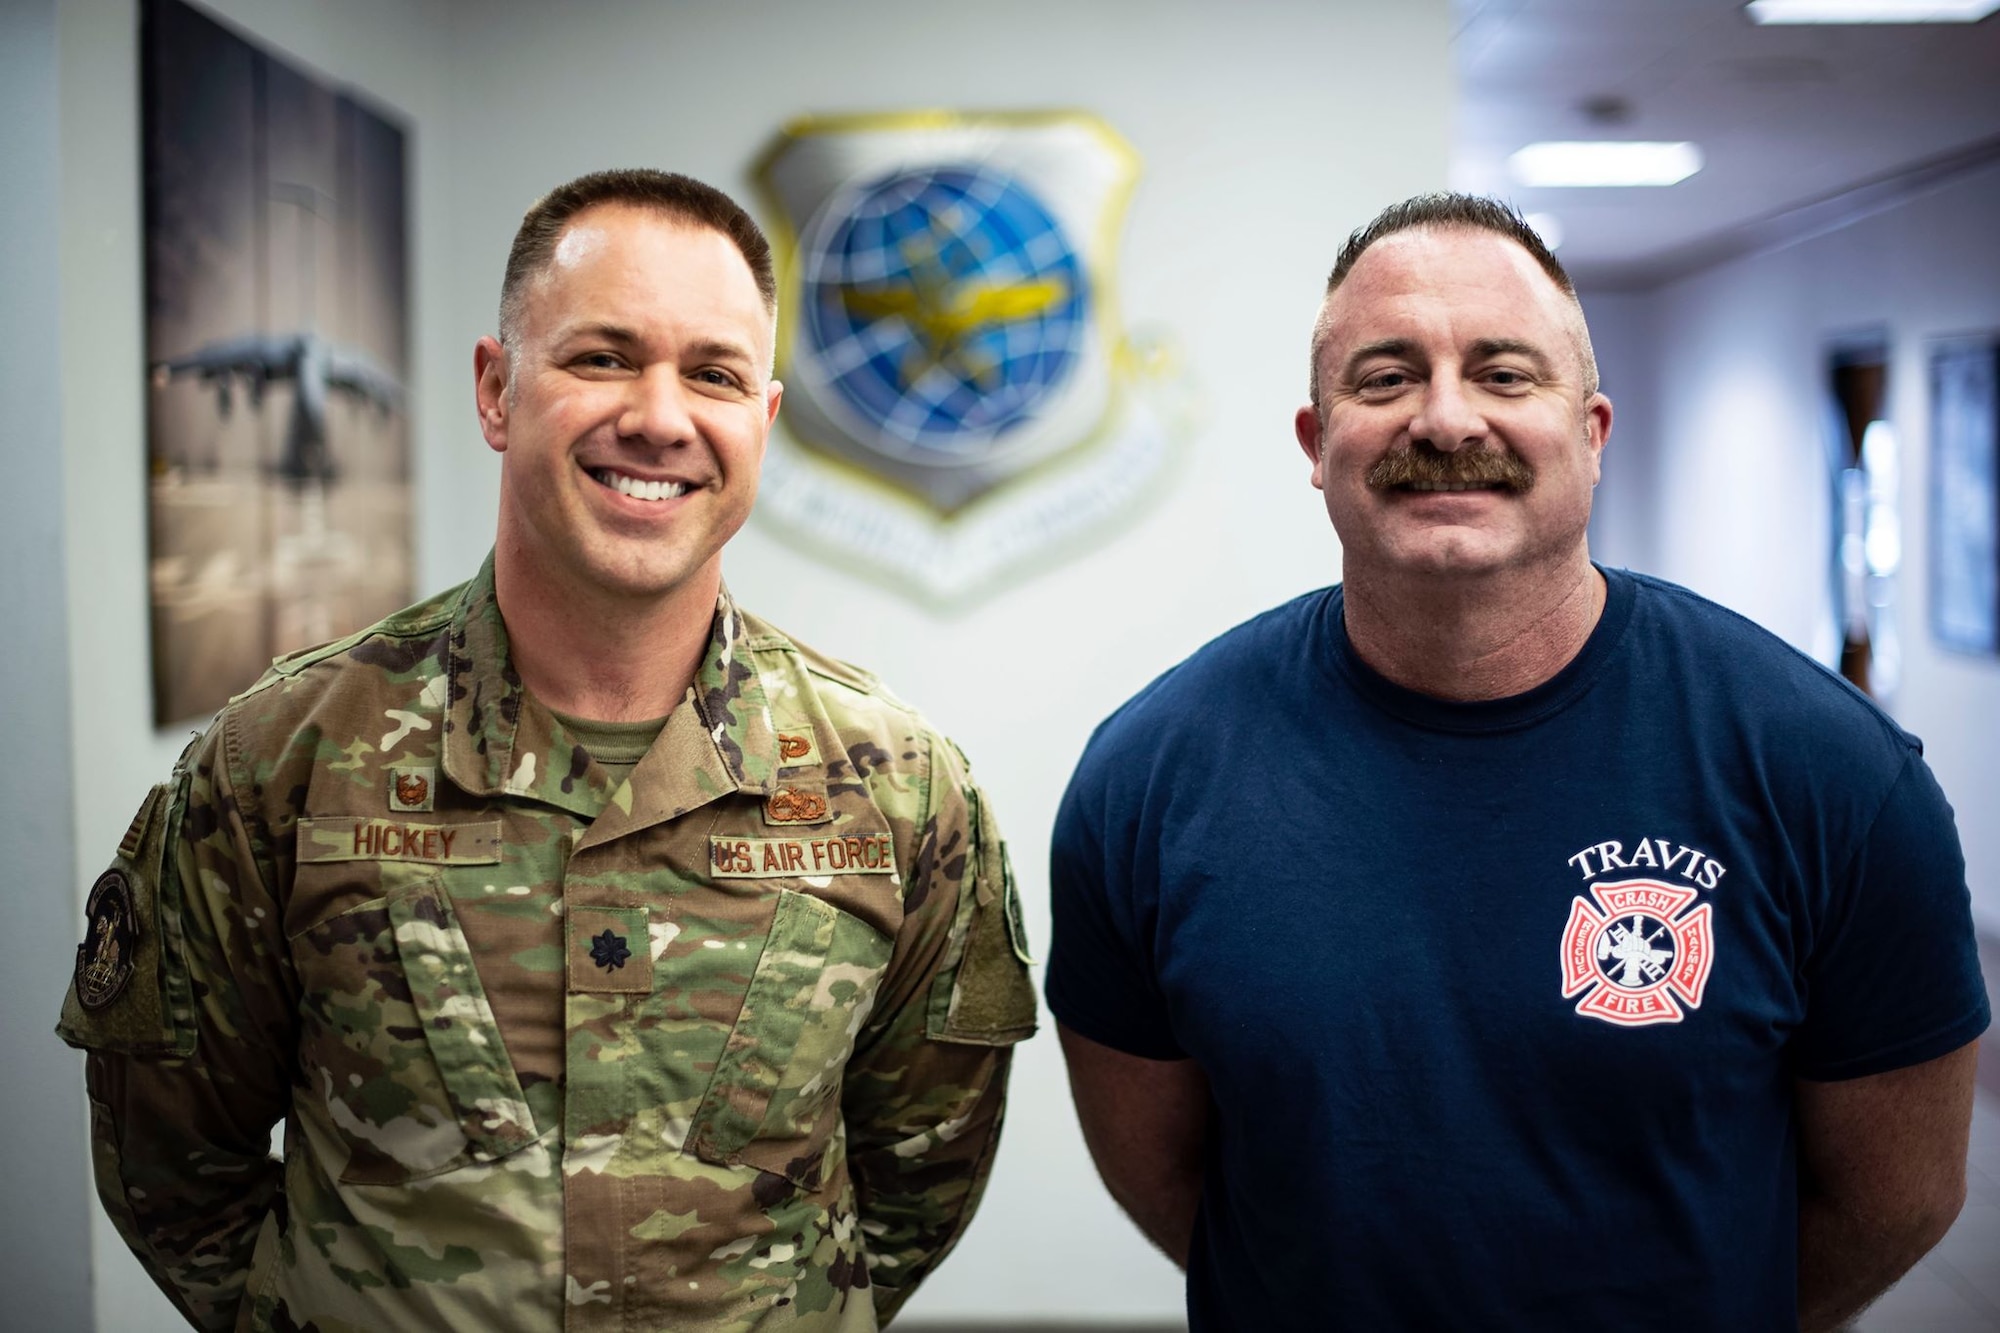 Two men stand next to each other inside of a brightly-lit building. One wears a military uniform and one wears a tee shirt with "Travis fire department" on it. Both are smiling.